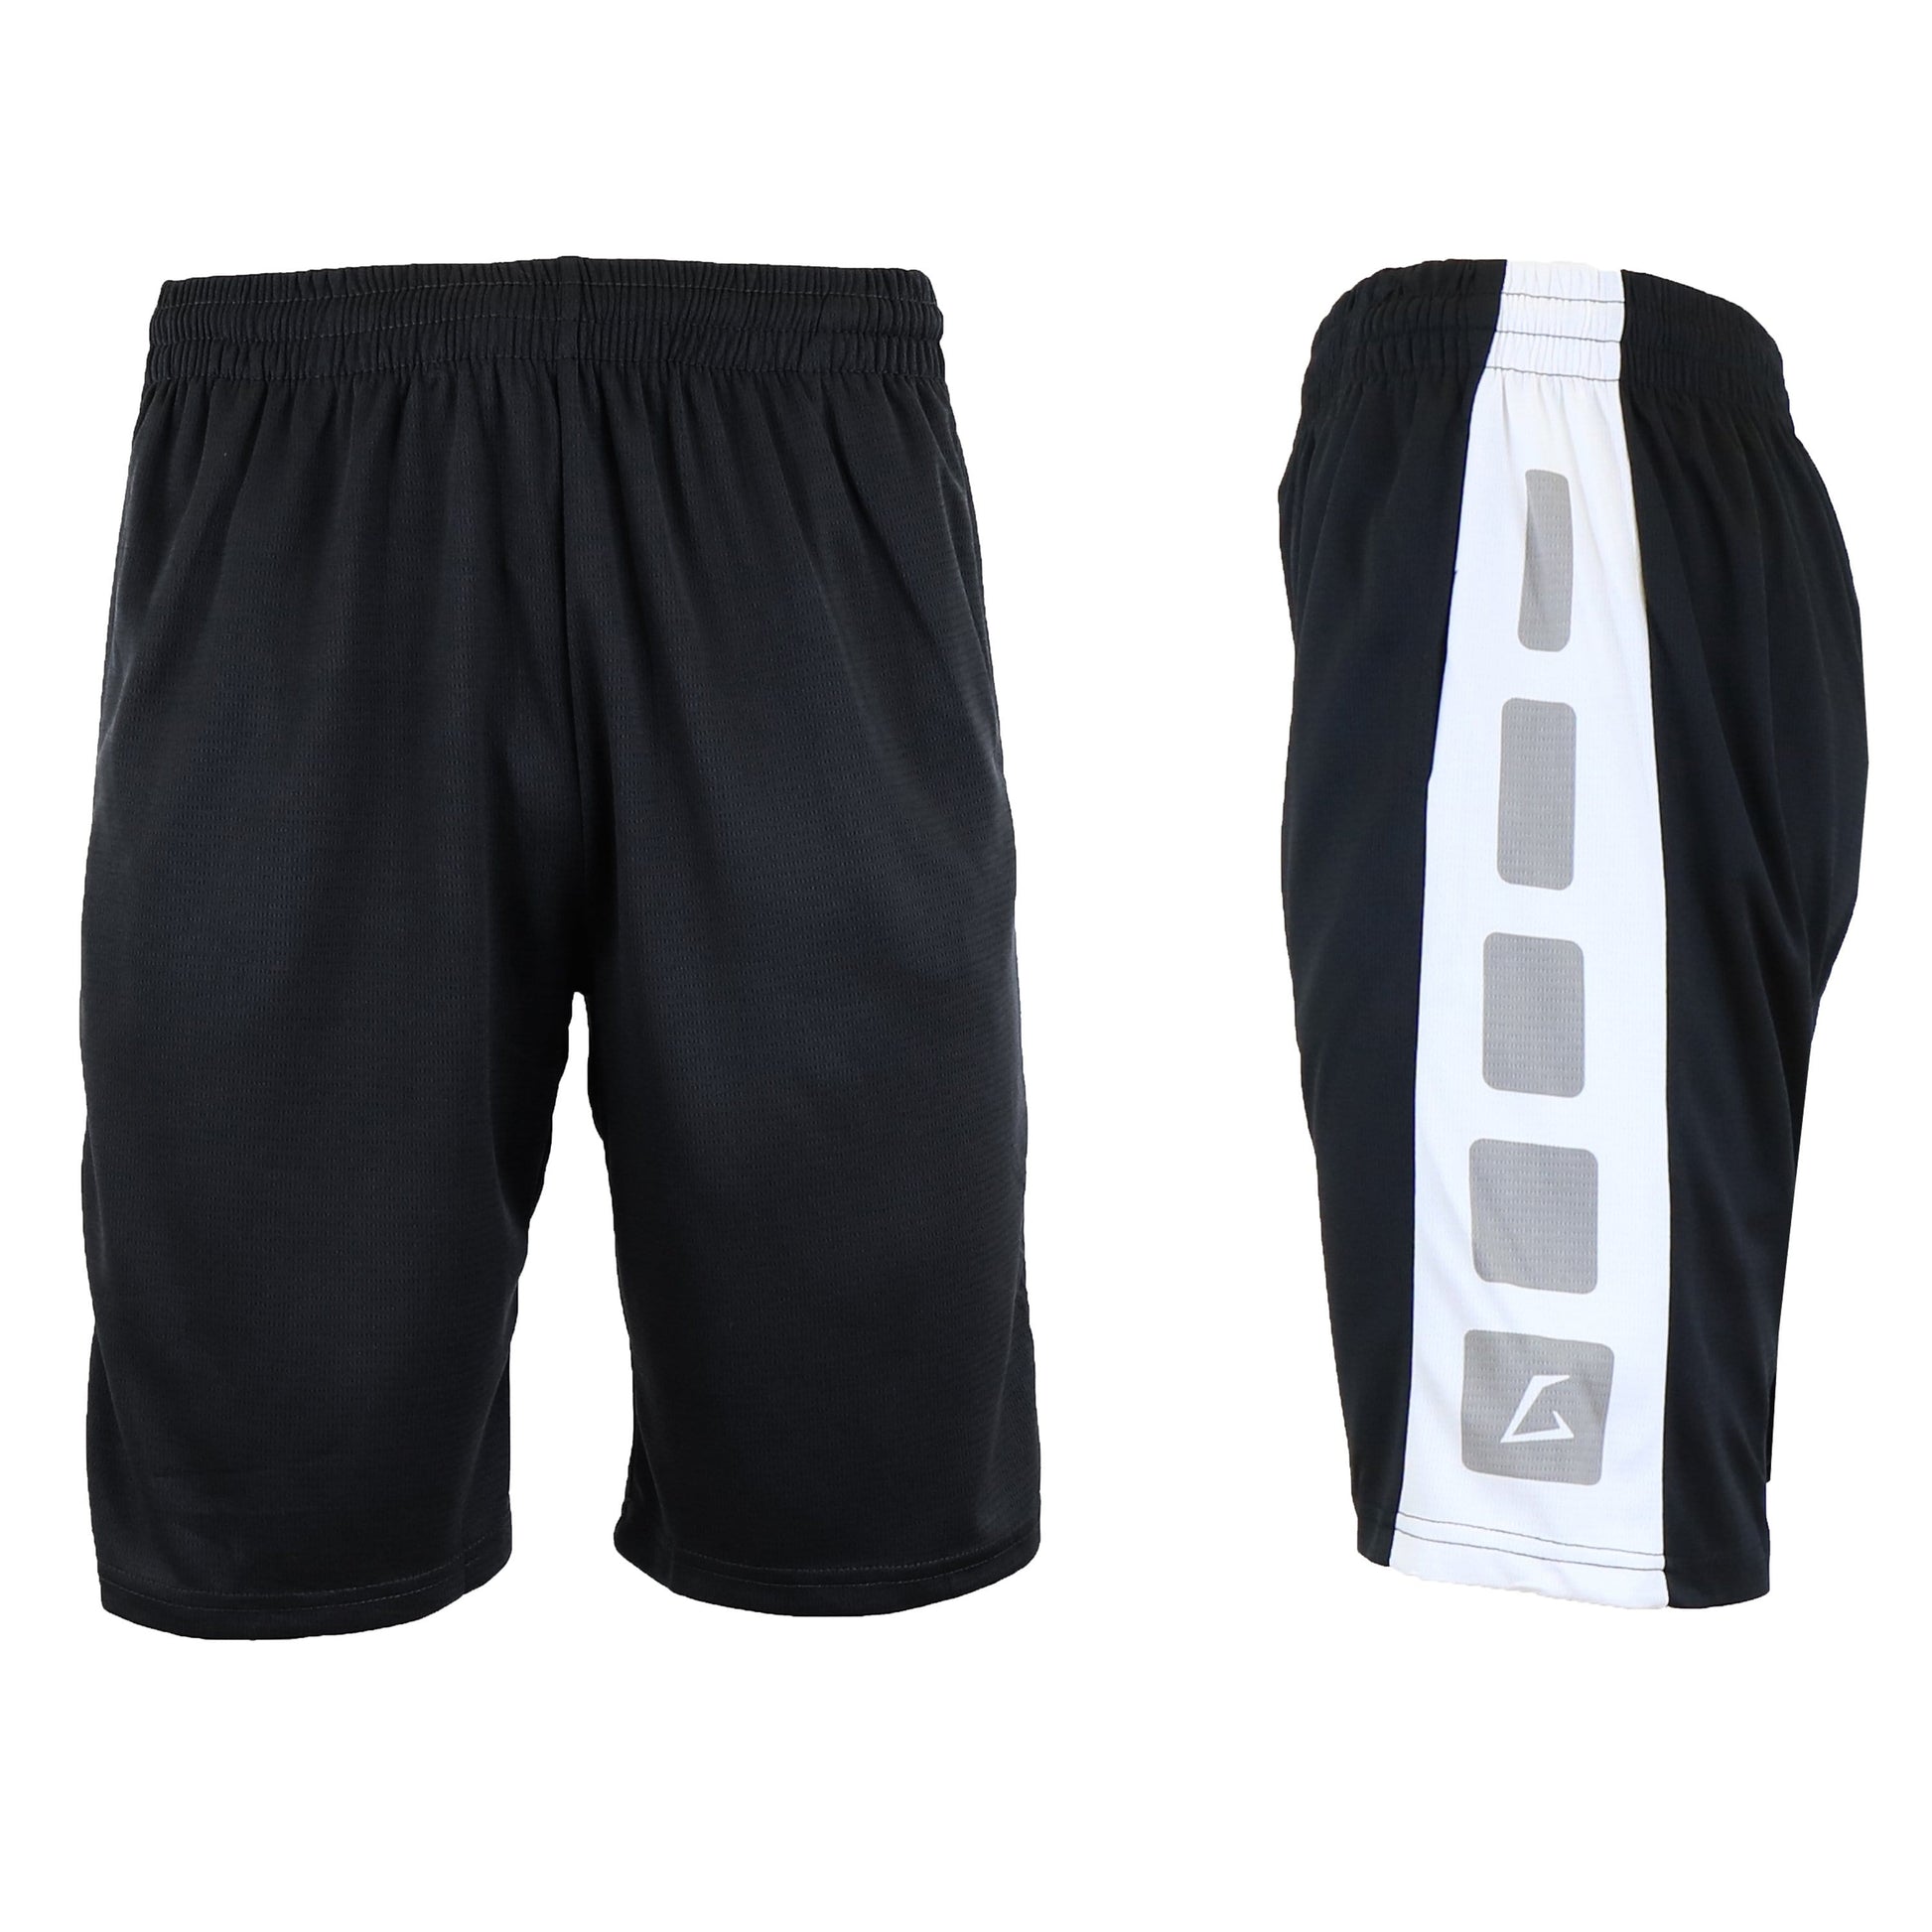 Men's Moisture Wicking Active Mesh Performance Shorts (S-2XL) - GalaxybyHarvic